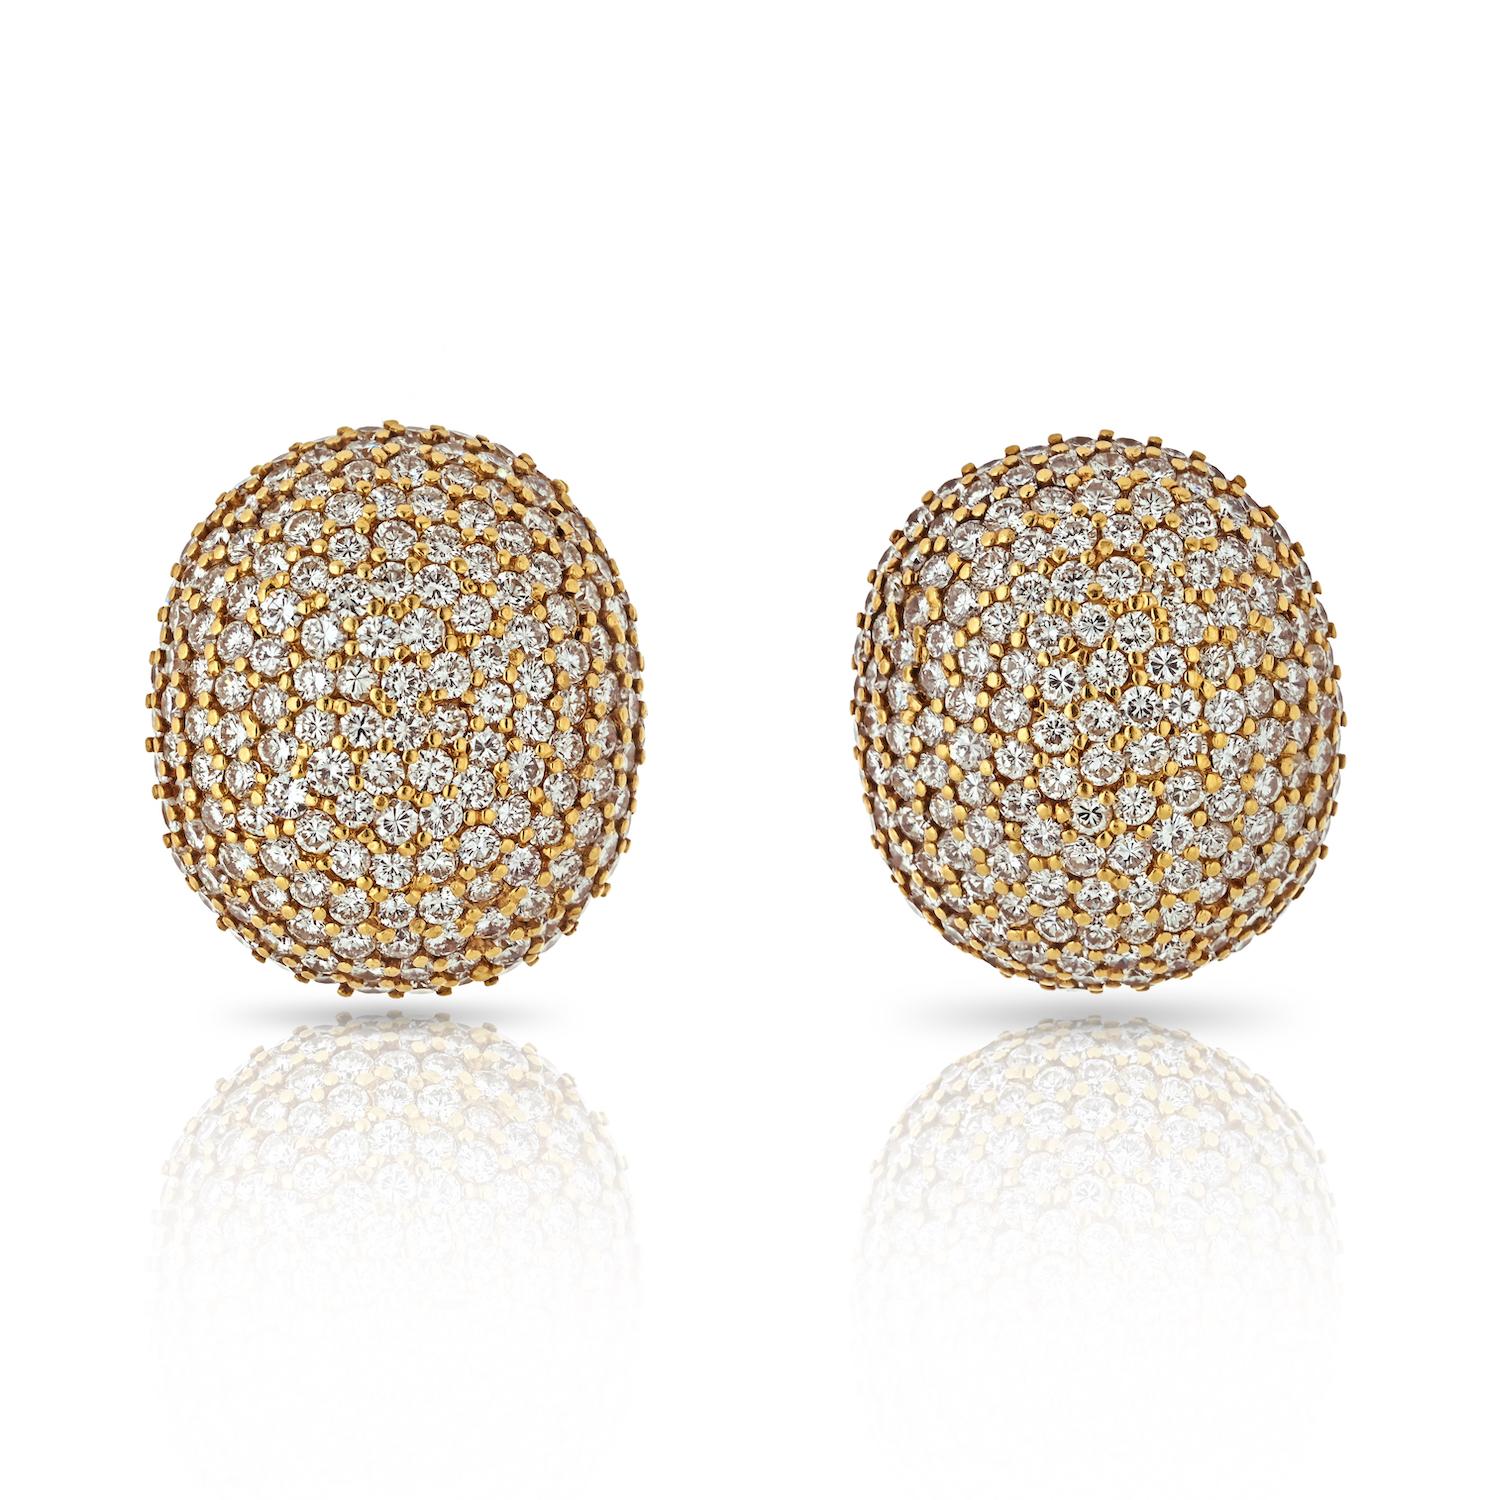 17 Carats 18k Yellow Gold Large Bombe Diamond Cluster Oval Earrings In Excellent Condition For Sale In New York, NY